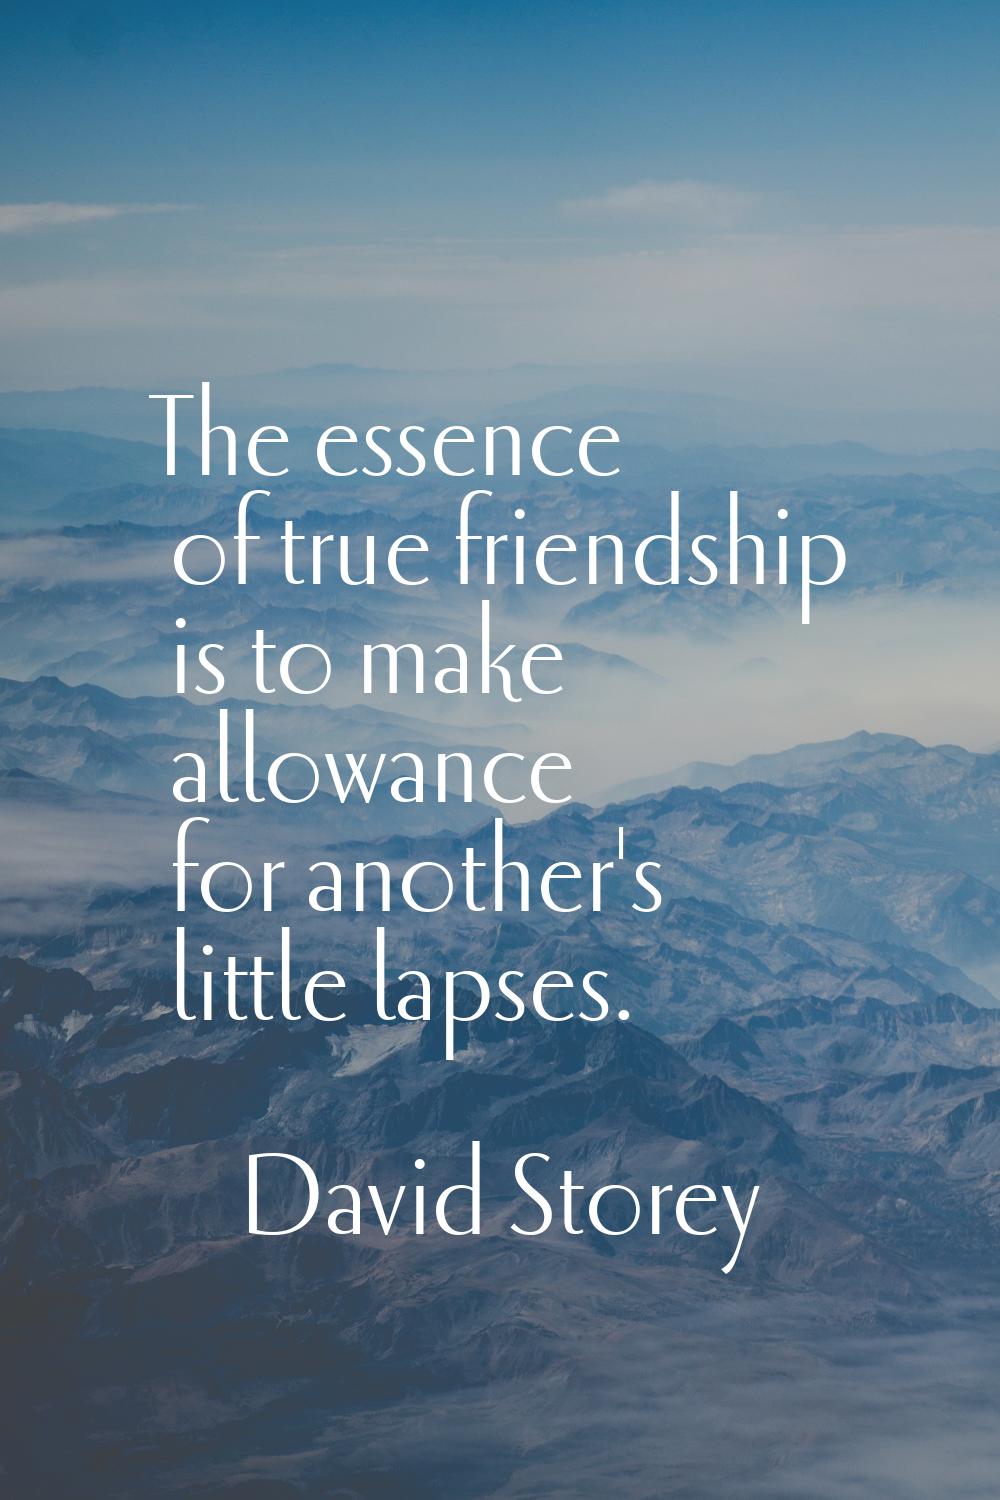 The essence of true friendship is to make allowance for another's little lapses.